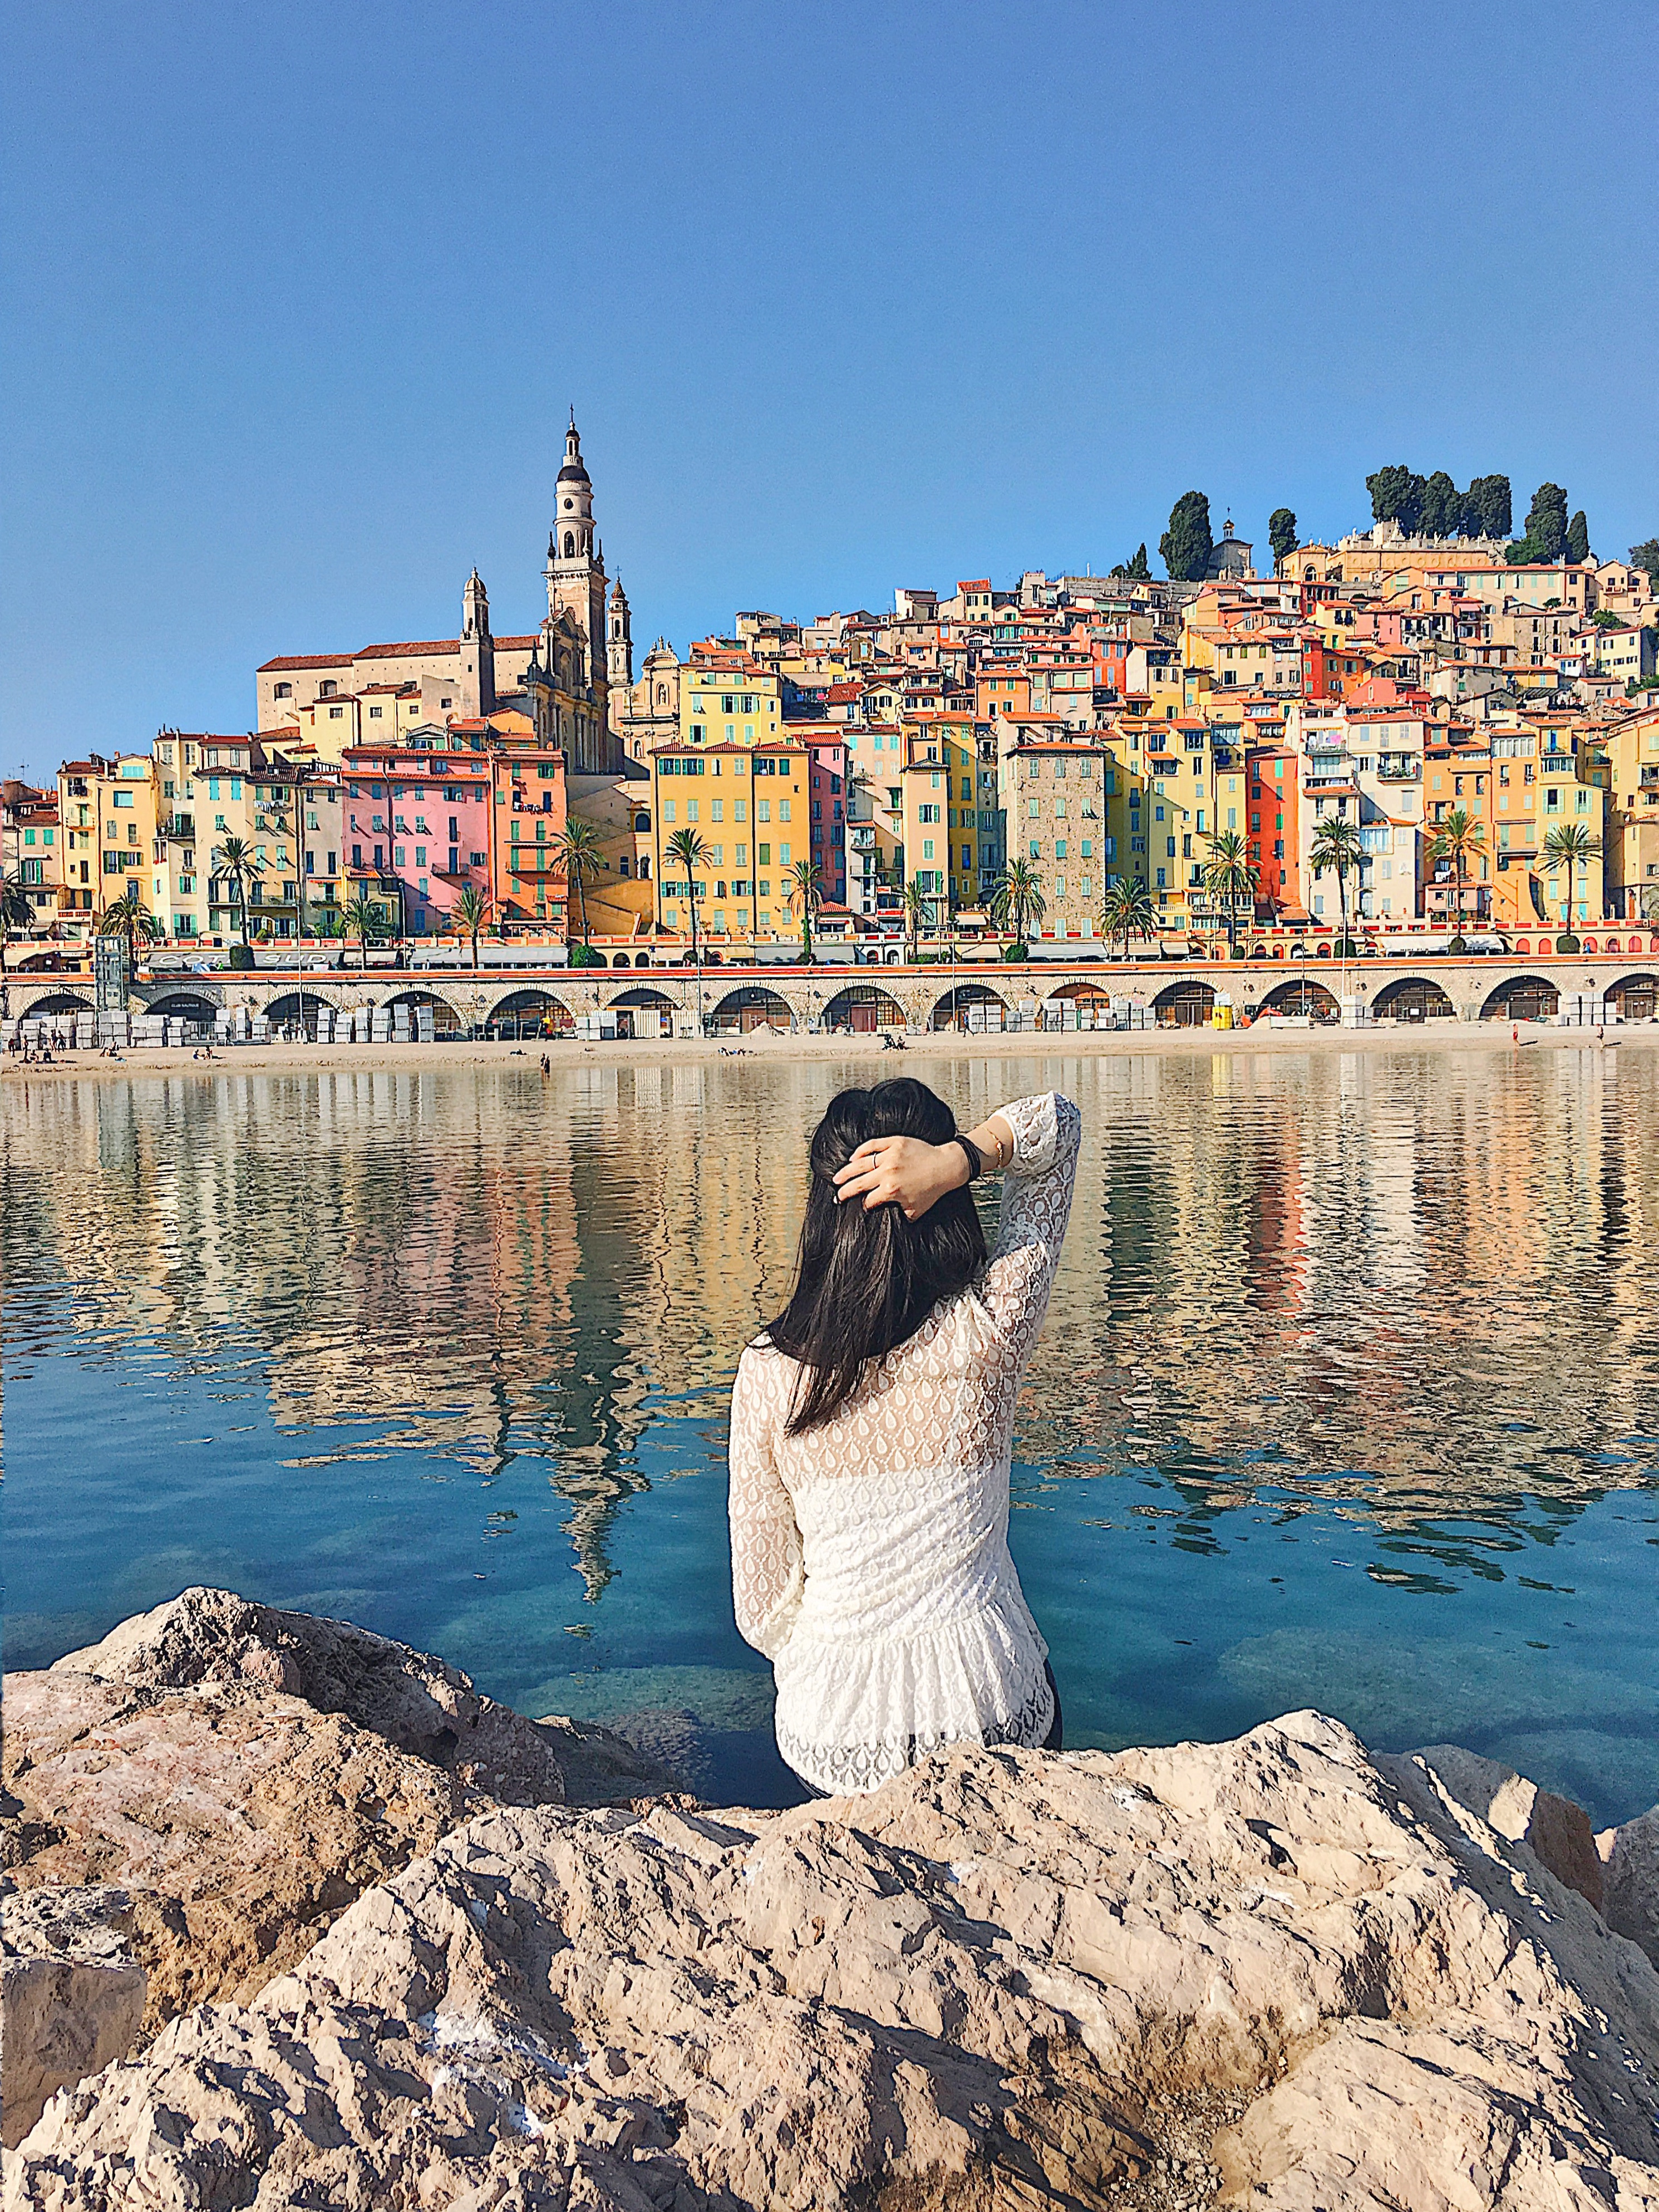 Views of pastel colored homes in Menton